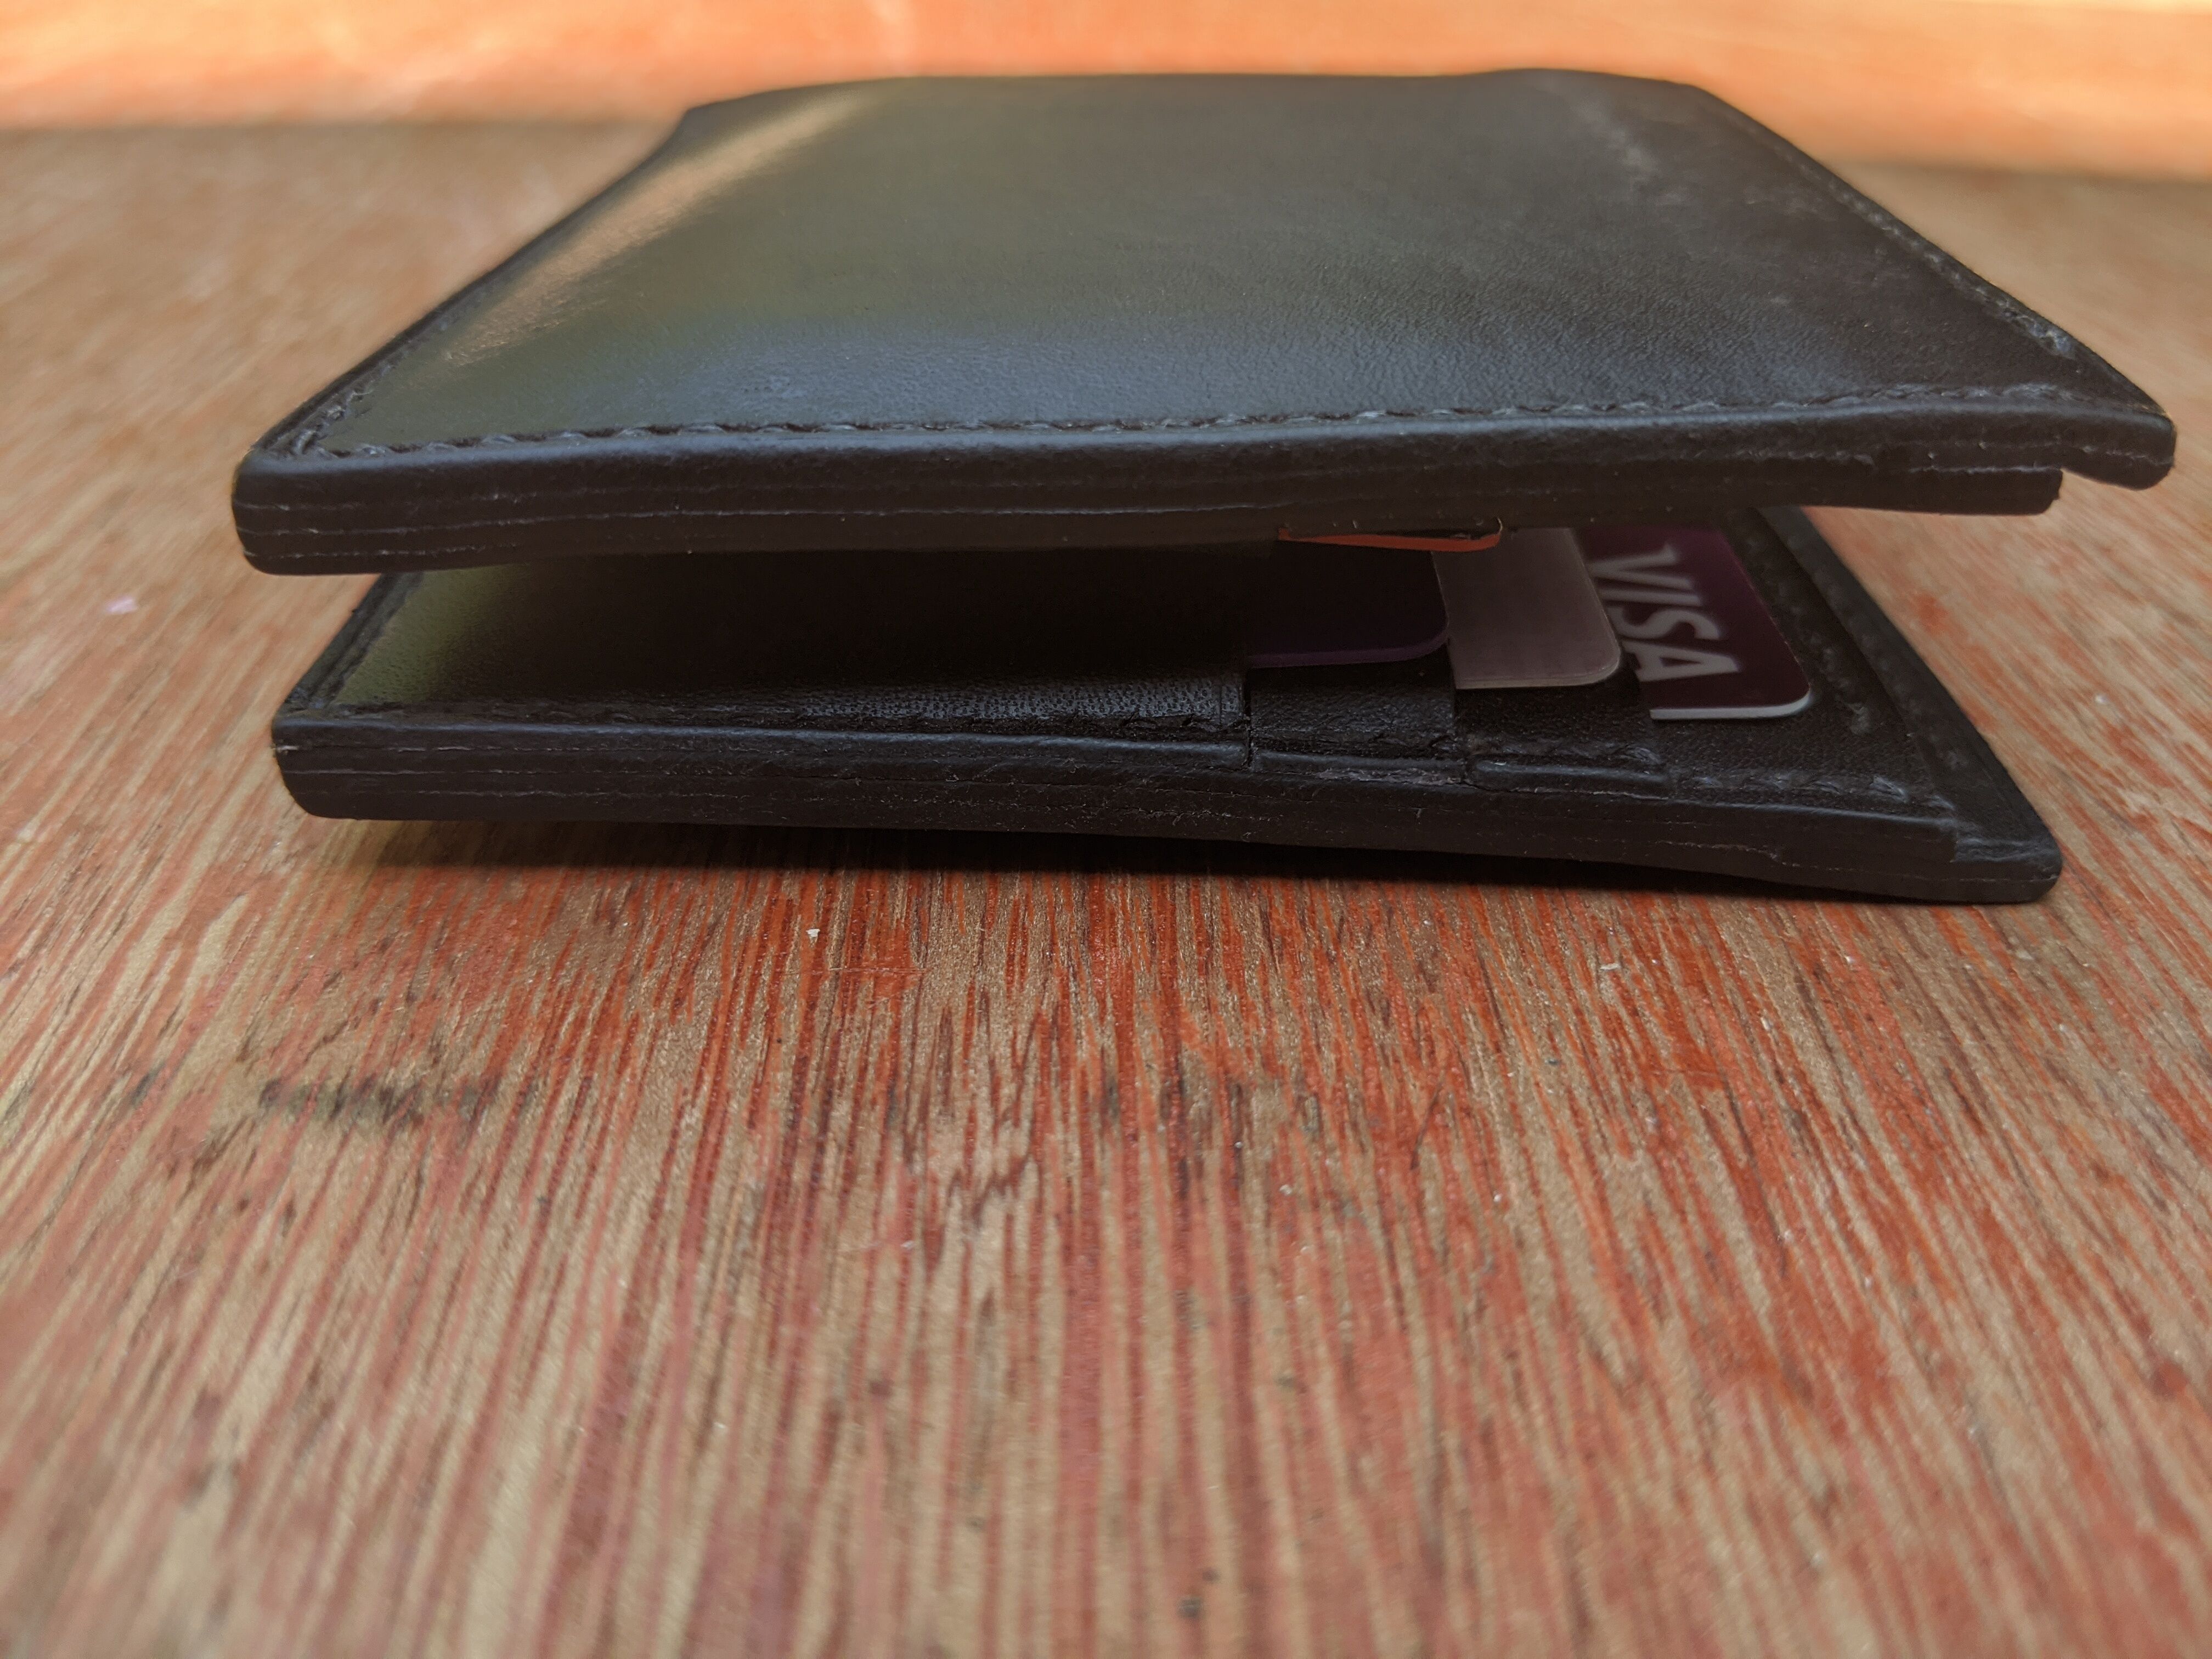 The side edges of the wallet.